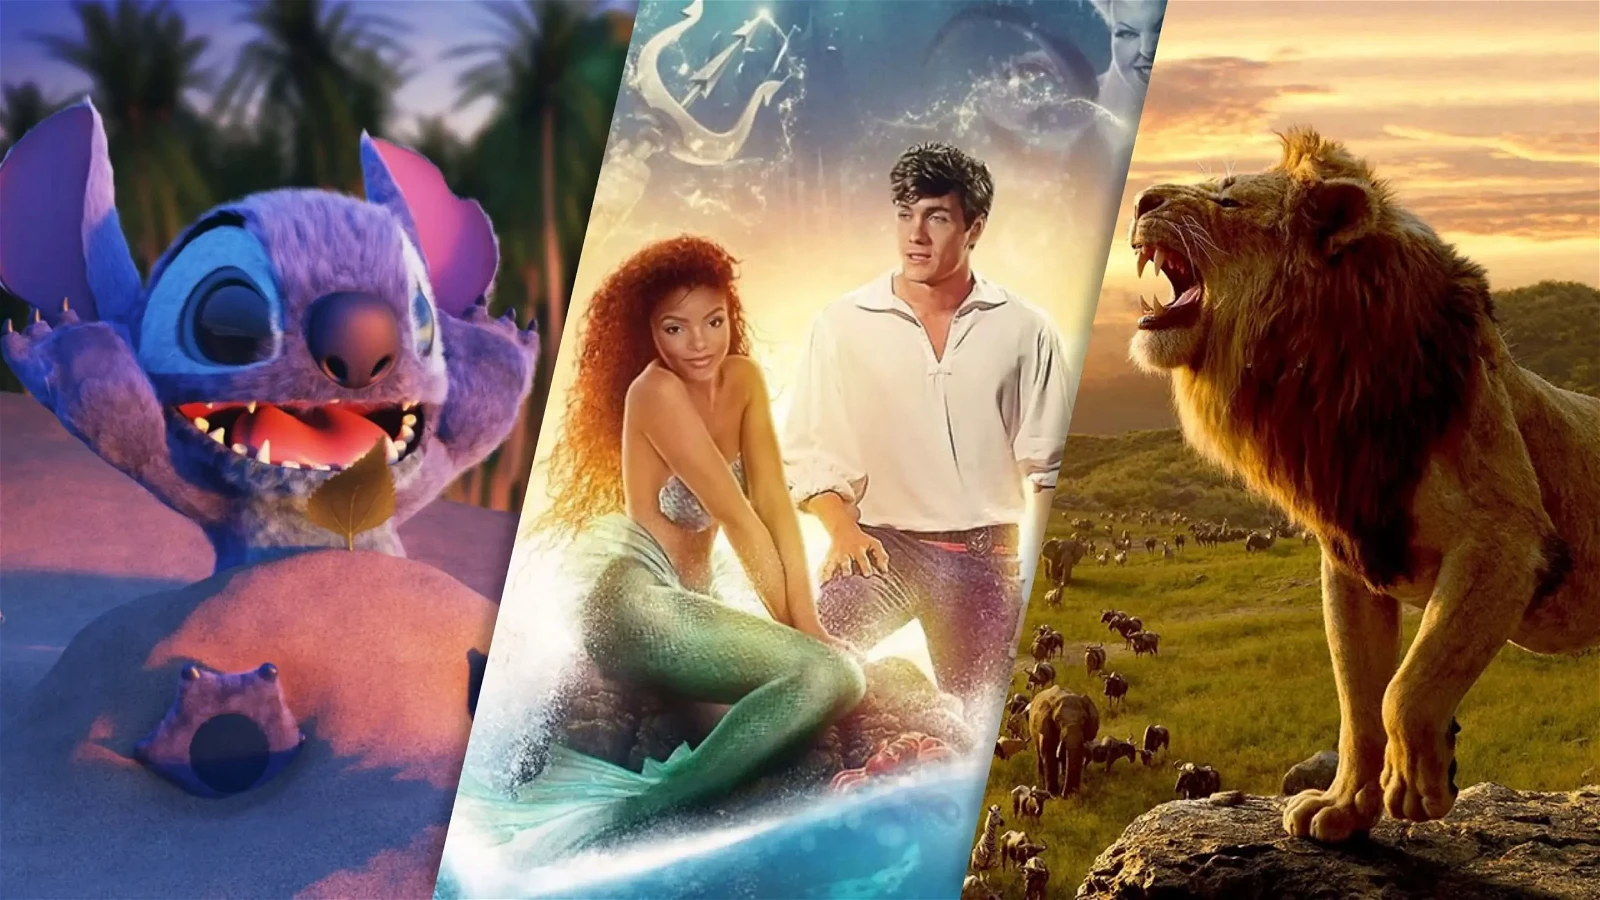 Disney's disappointing live-action remakes 